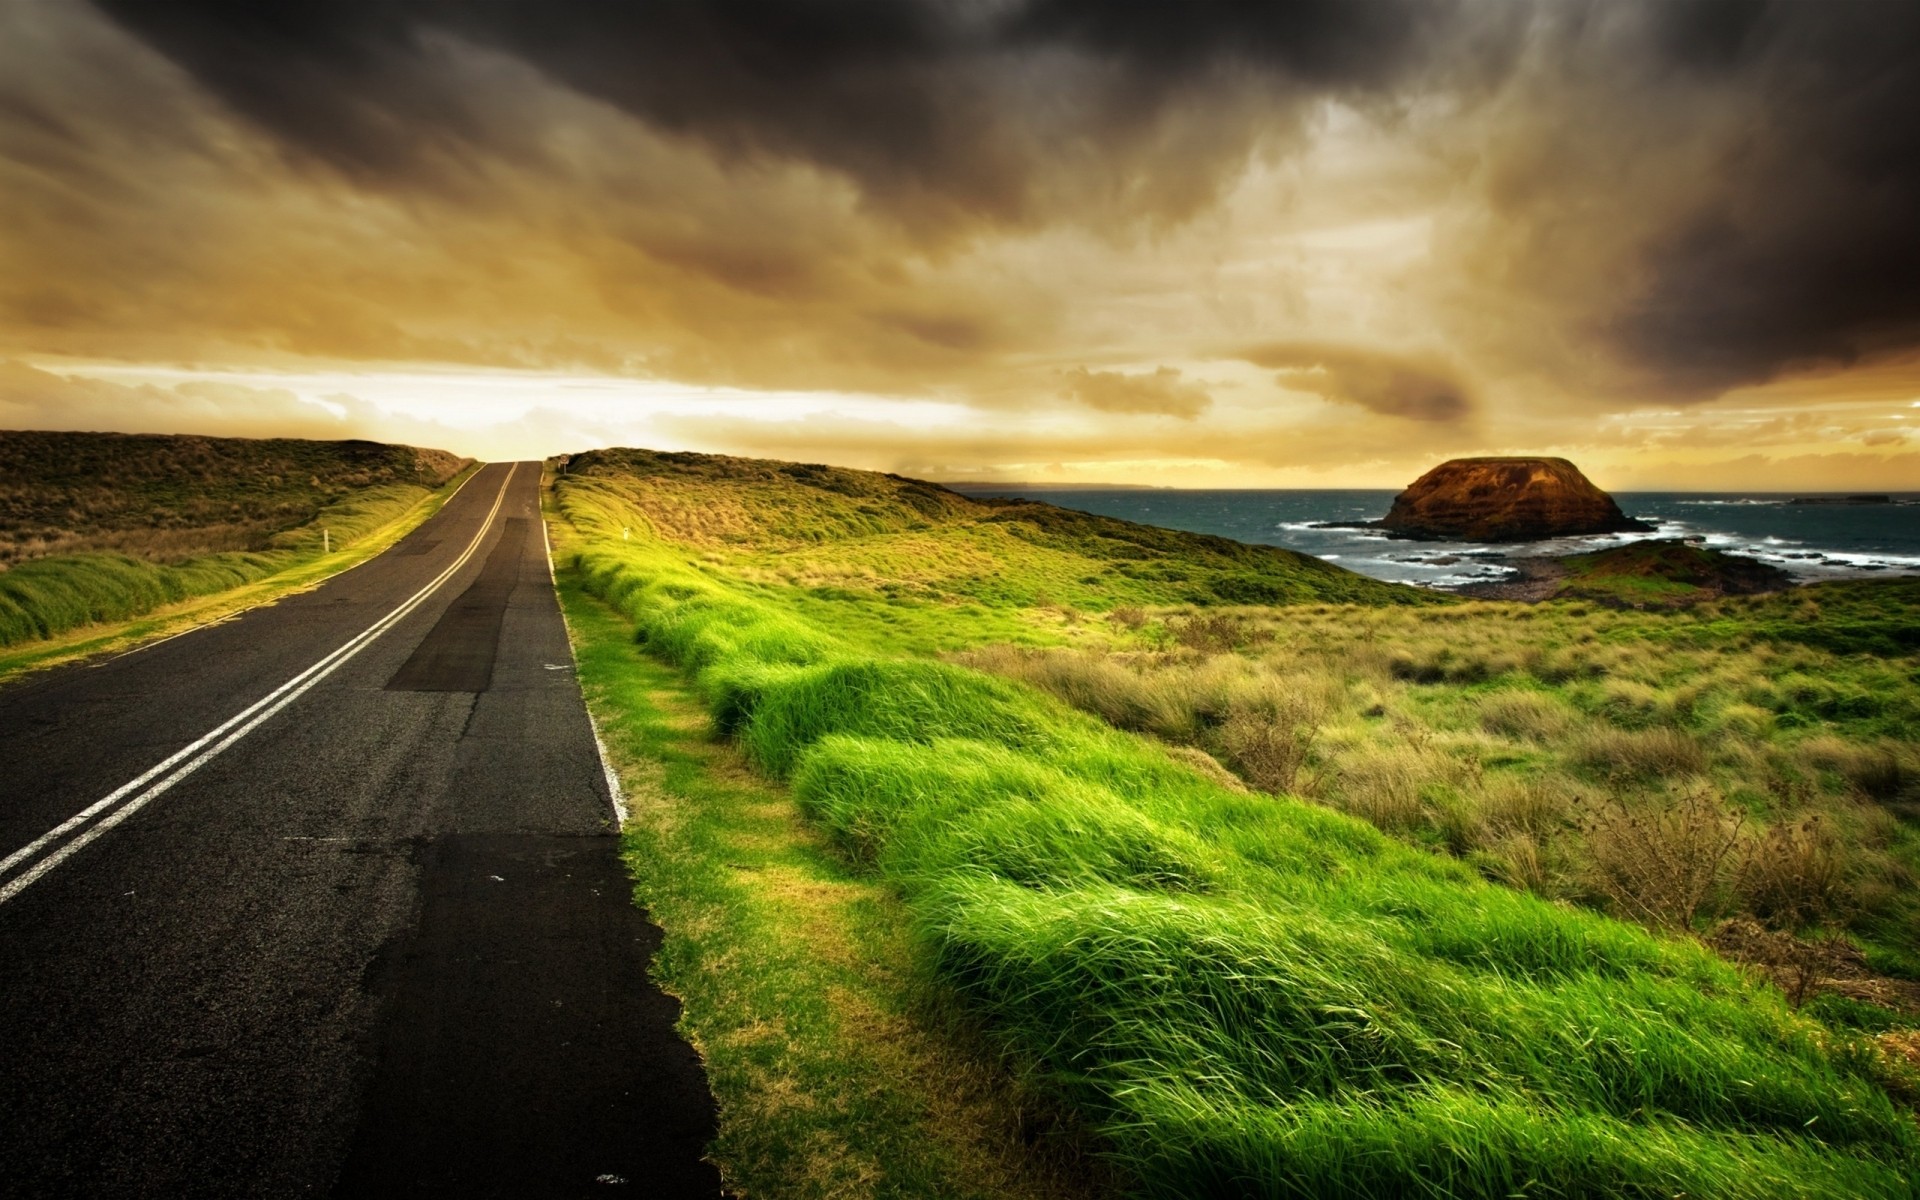 landscapes sunset landscape sky road nature grass dramatic travel outdoors dawn storm cloud countryside rural sea river dark